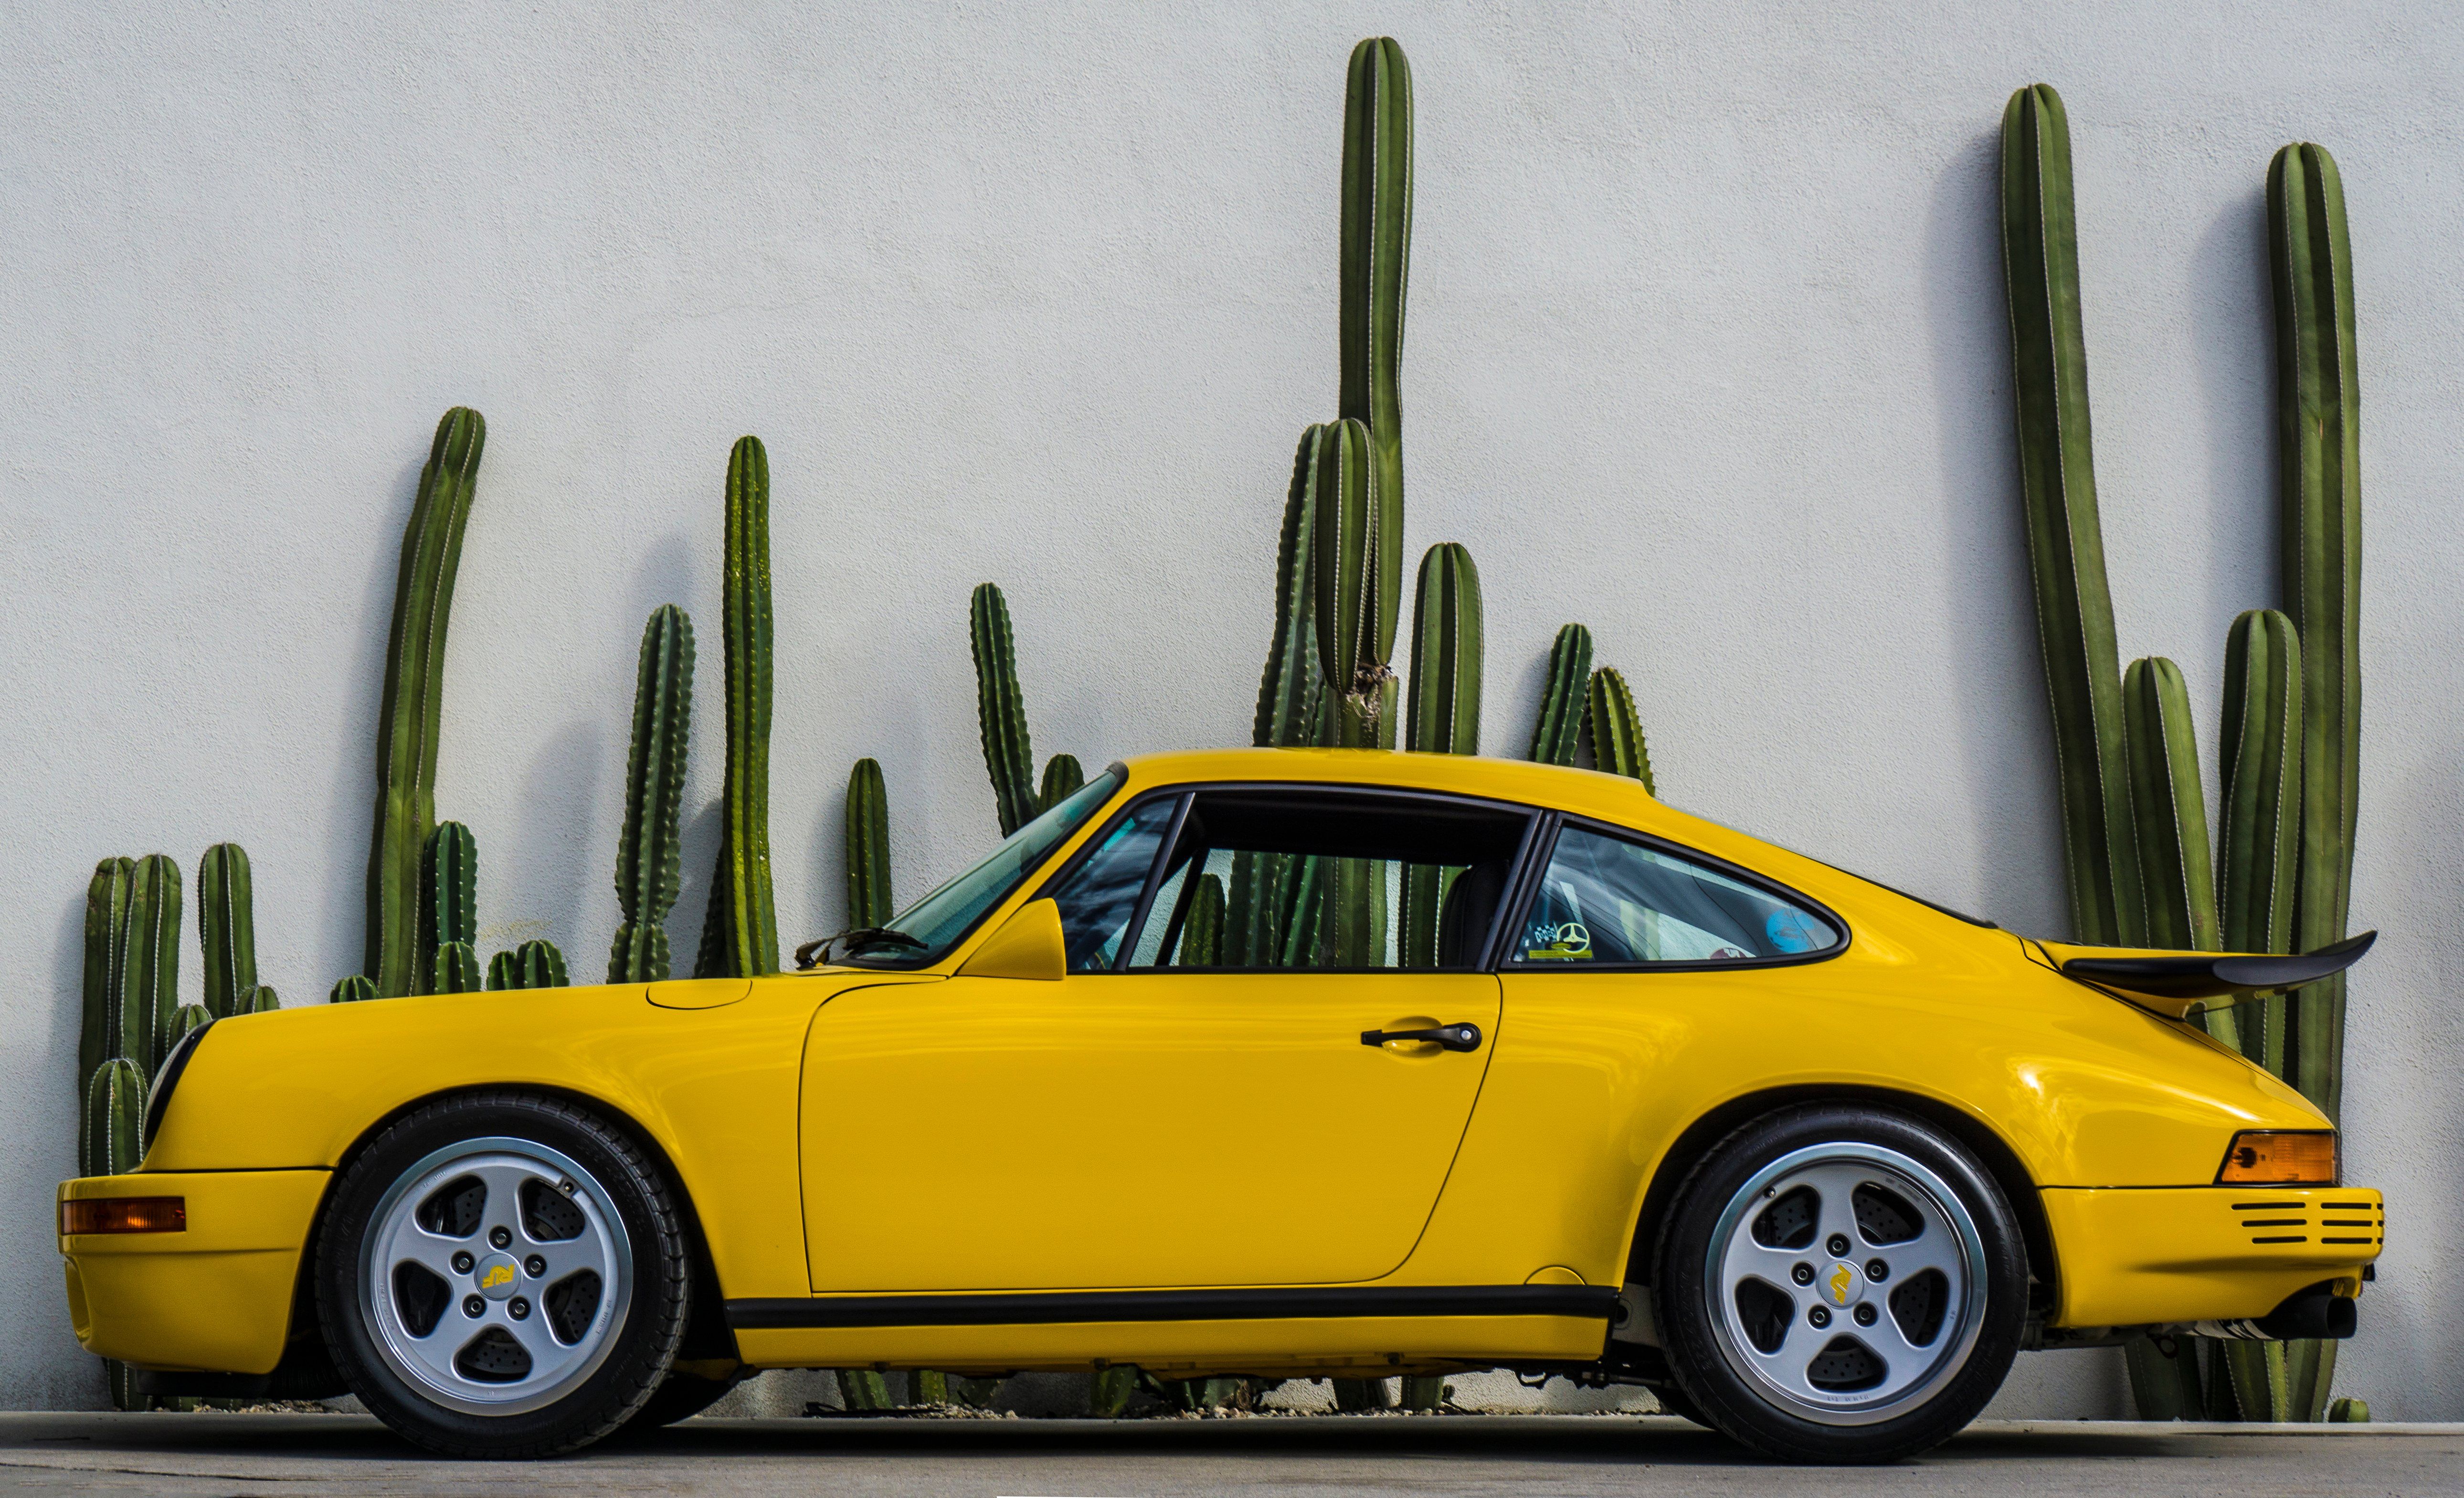 Your Ridiculously Awesome Ruf Ctr Yellowbird Wallpaper Is Here